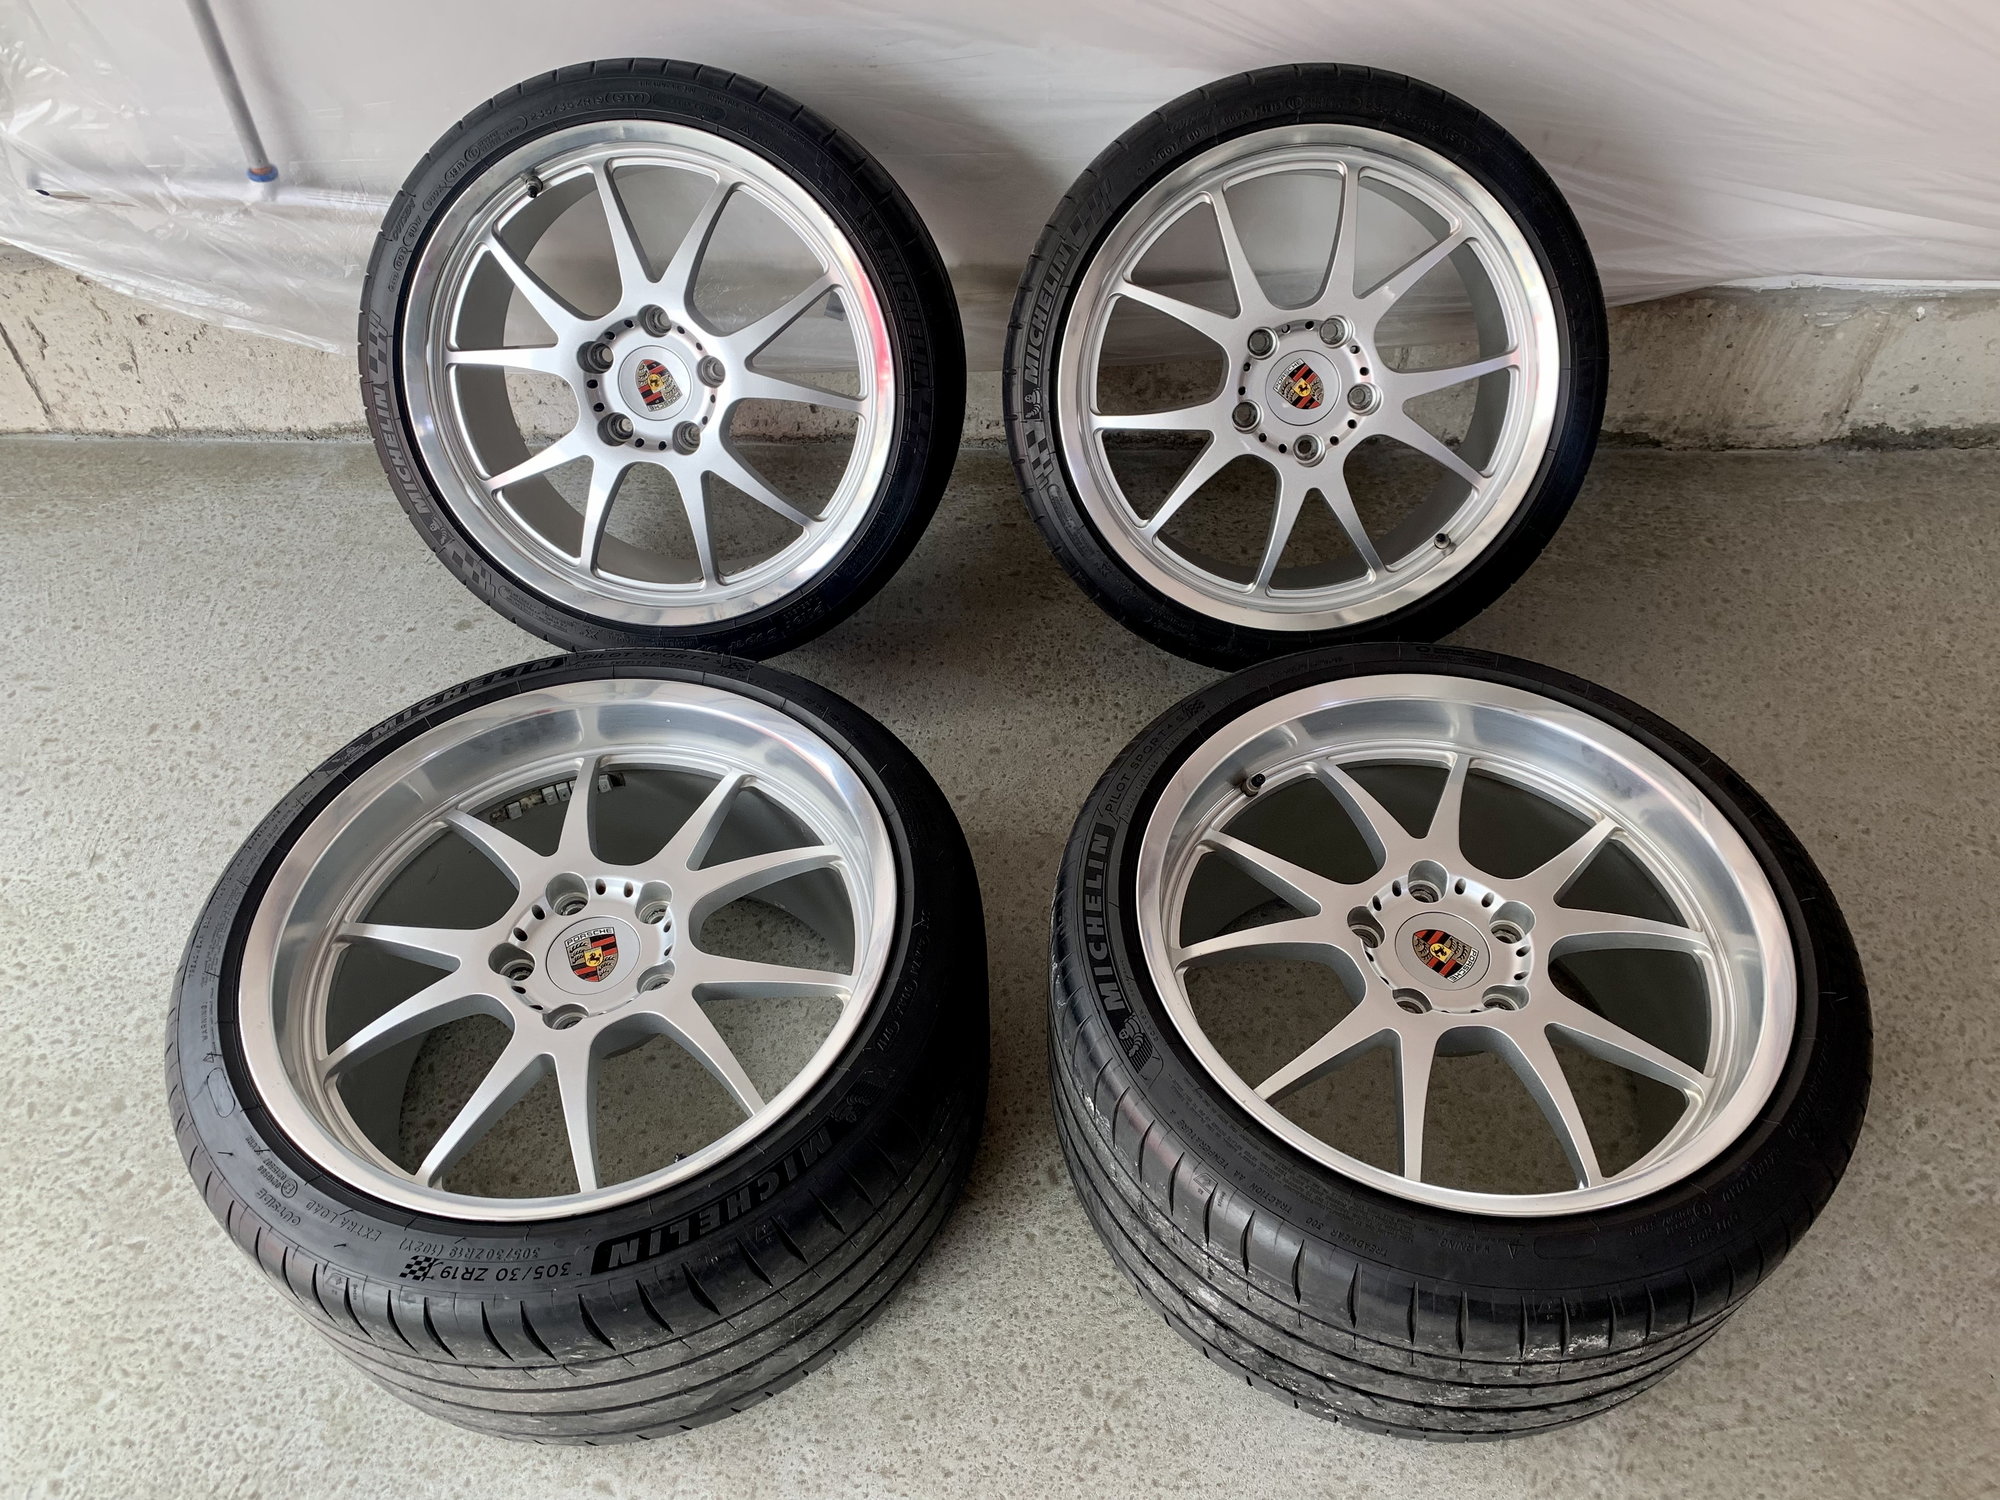 Wheels and Tires/Axles - Rare! Champion Motorsports RS98 Forged Wheels & Tires - Used - 0  All Models - Brampton, ON L6Y6C5, Canada